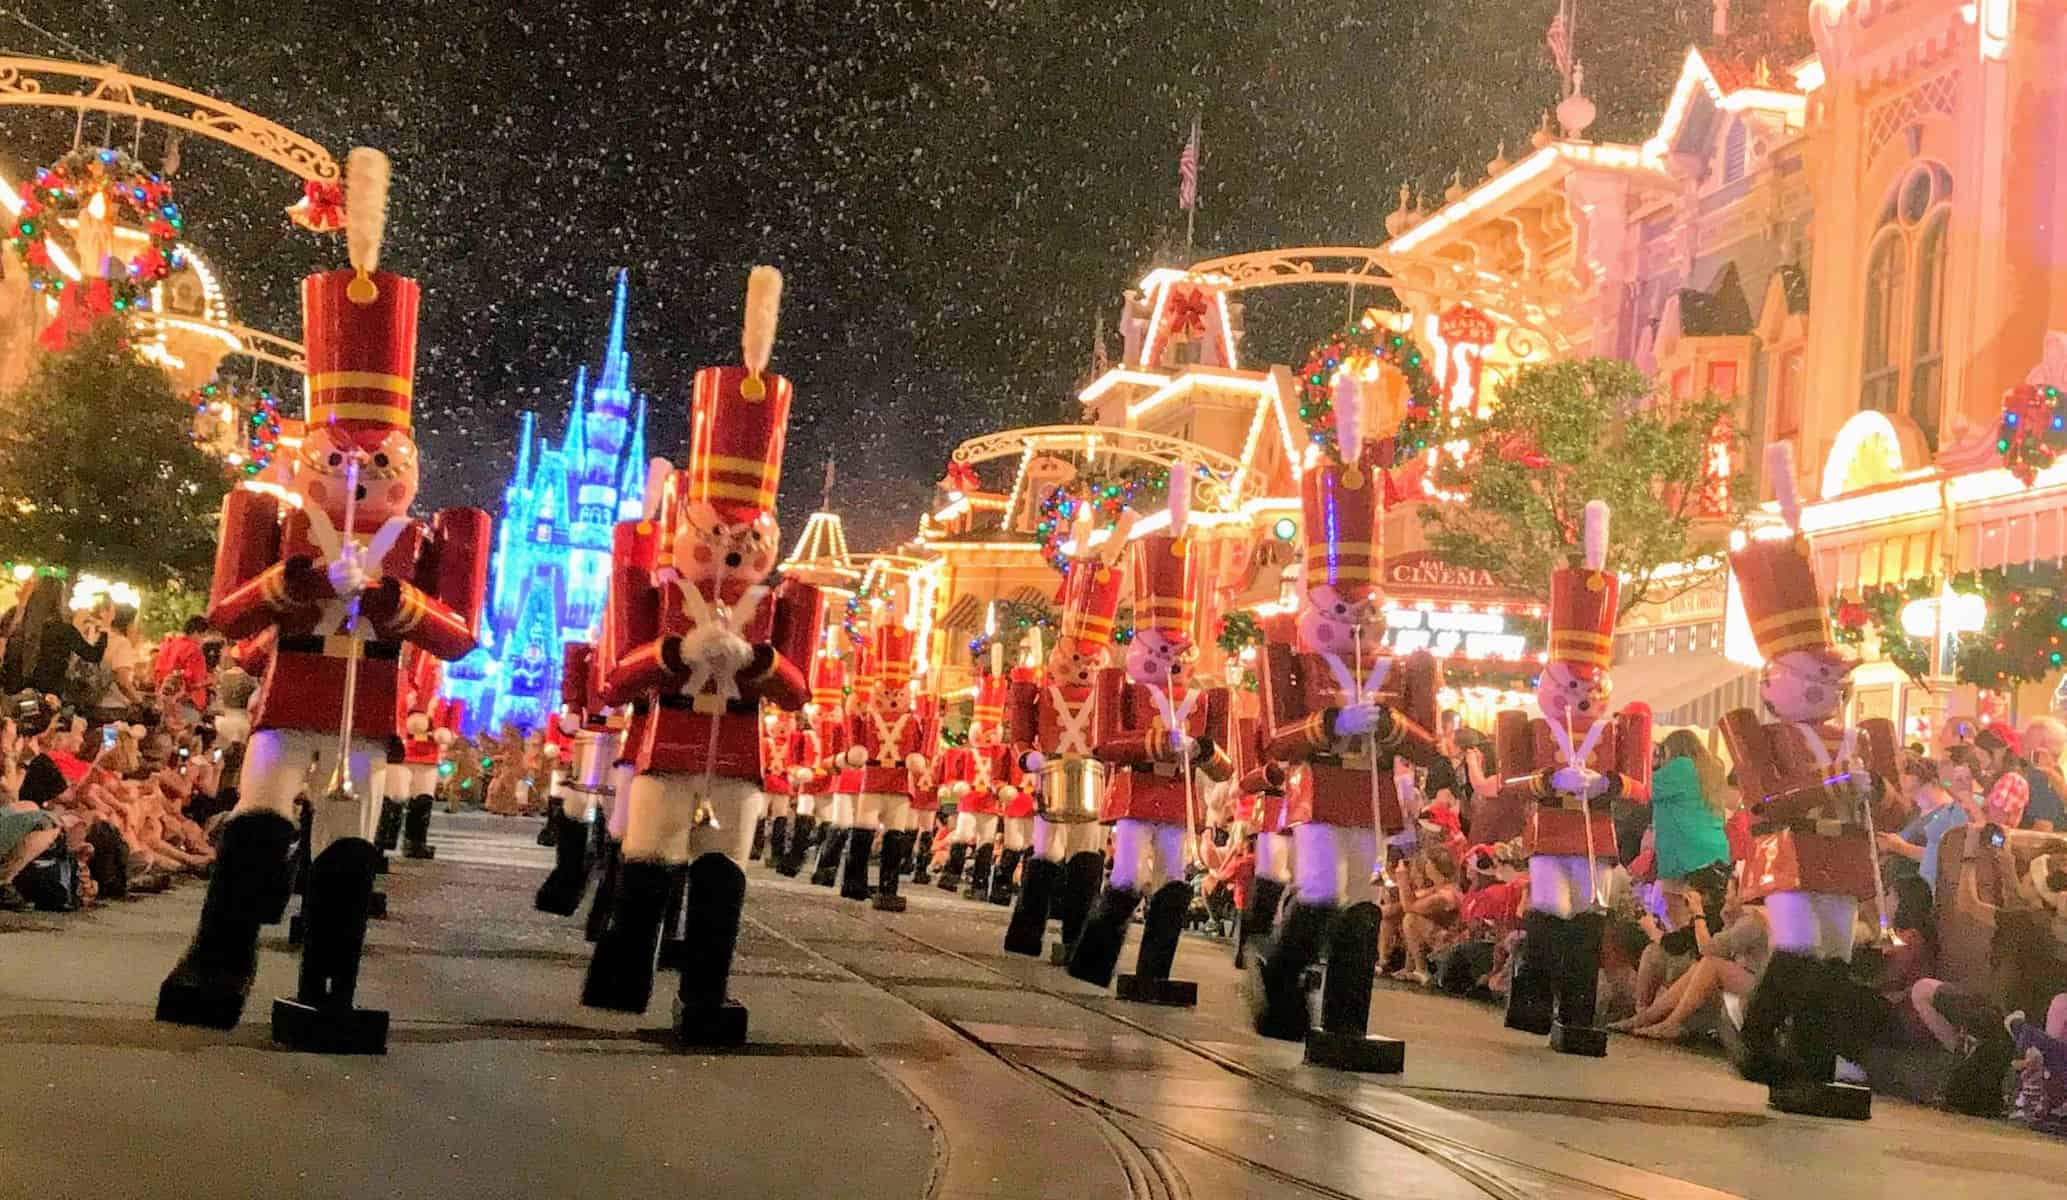 9 tips for making your visit to Mickey’s Very Merry Christmas Party magical